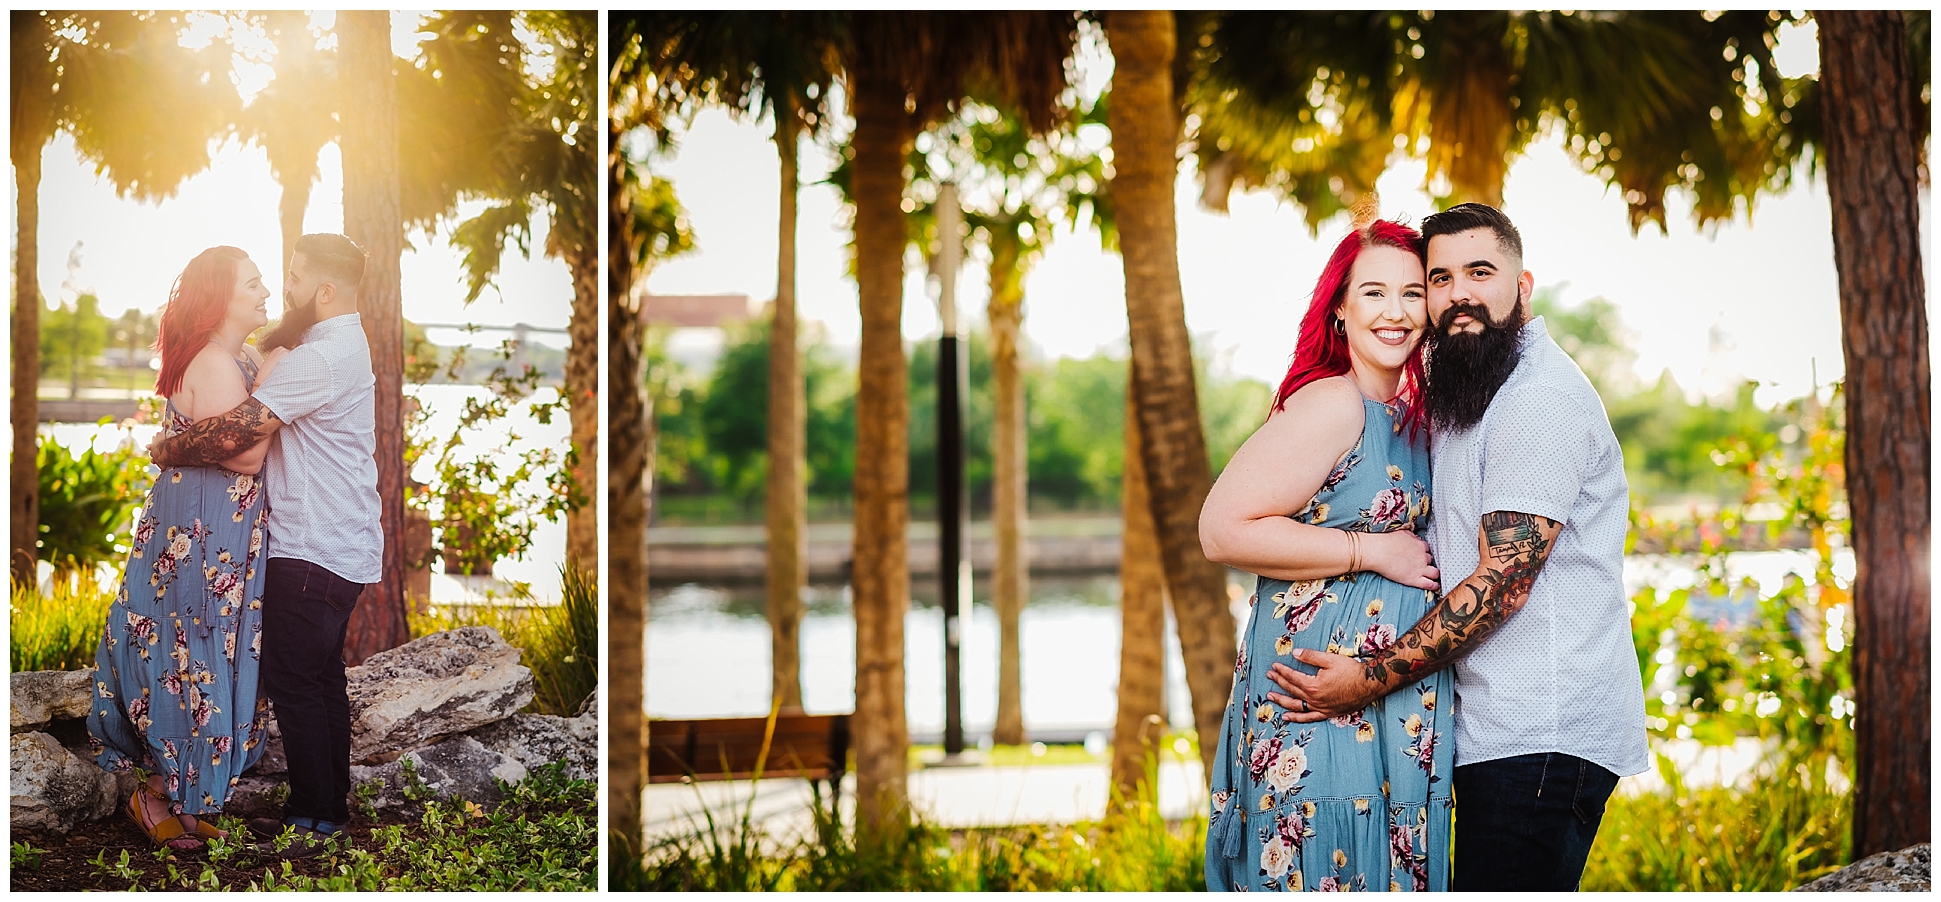 tampa-rad red-maternity-floral dress-armature works-rialto theater_0028.jpg